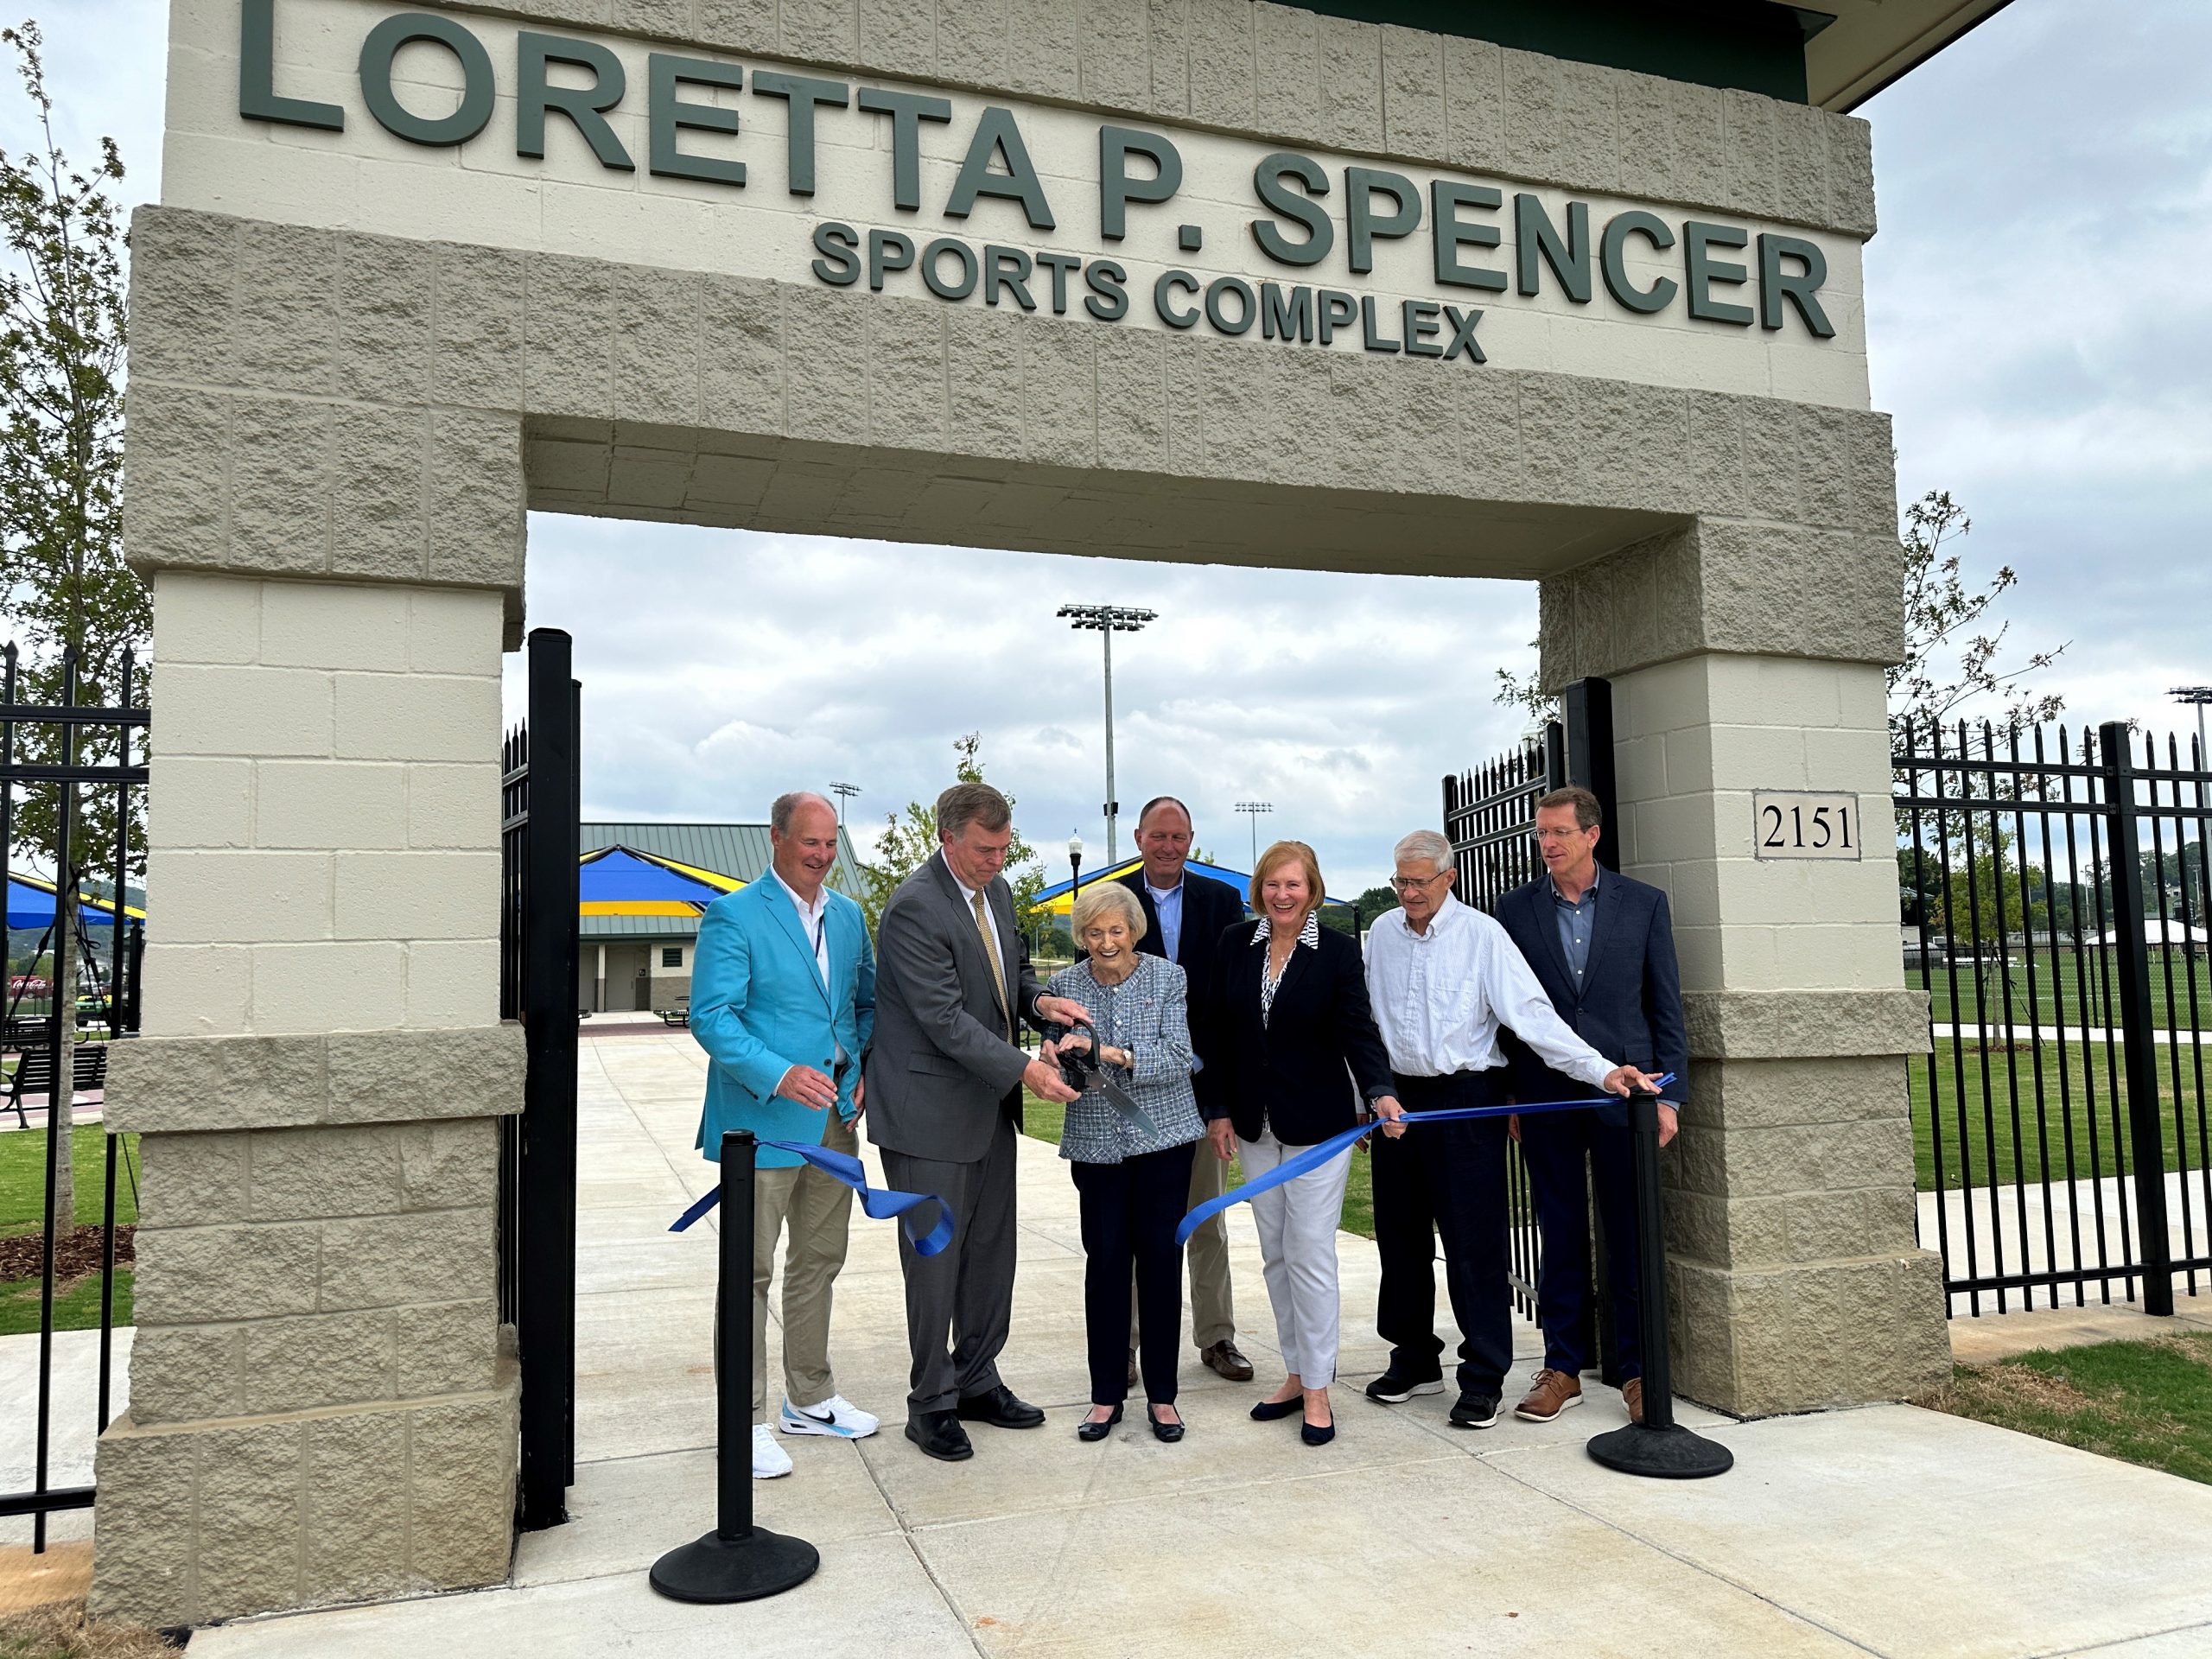 Loretta P. Spencer Sports Complex in John Hunt Park Expanded and Opened by City of Huntsville